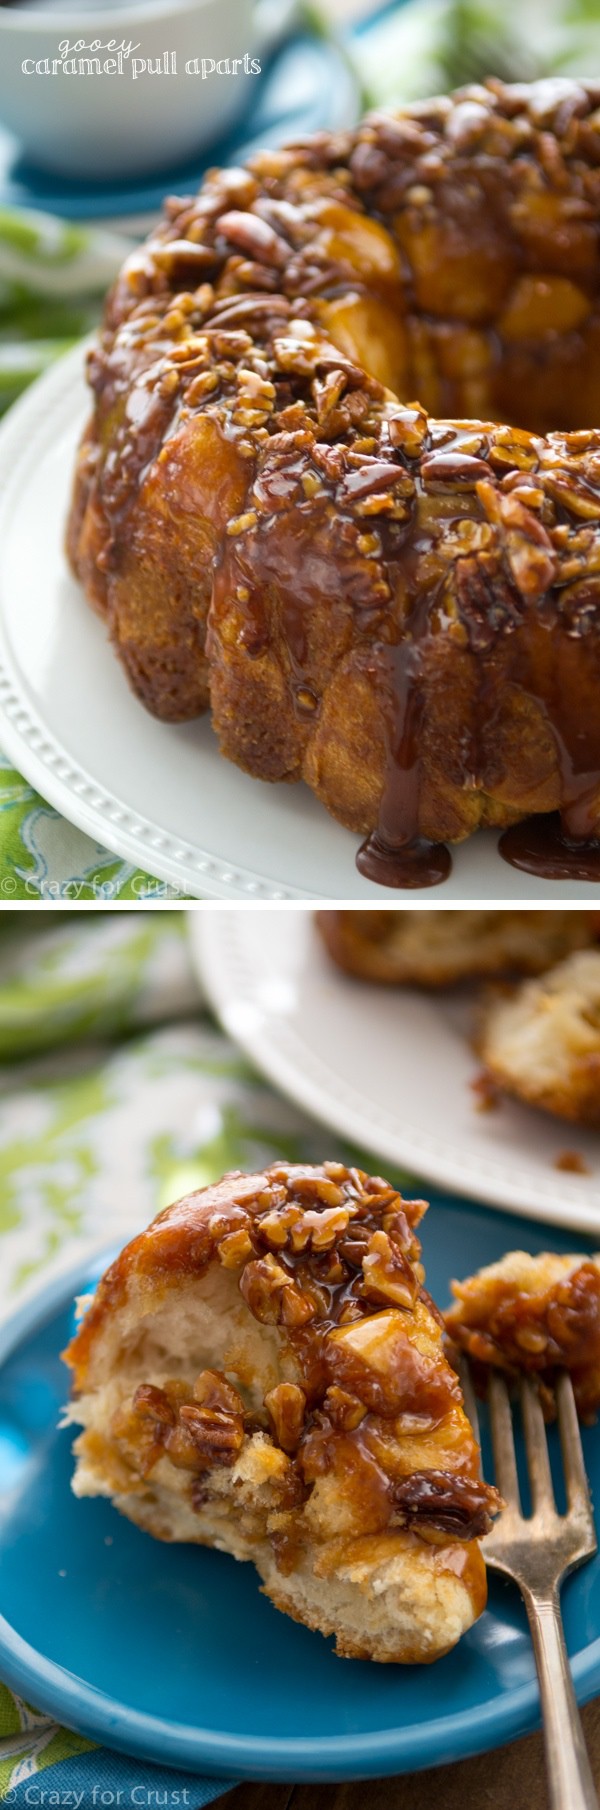 Gooey Caramel Pull-Aparts are perfect for holiday breakfast or brunch!